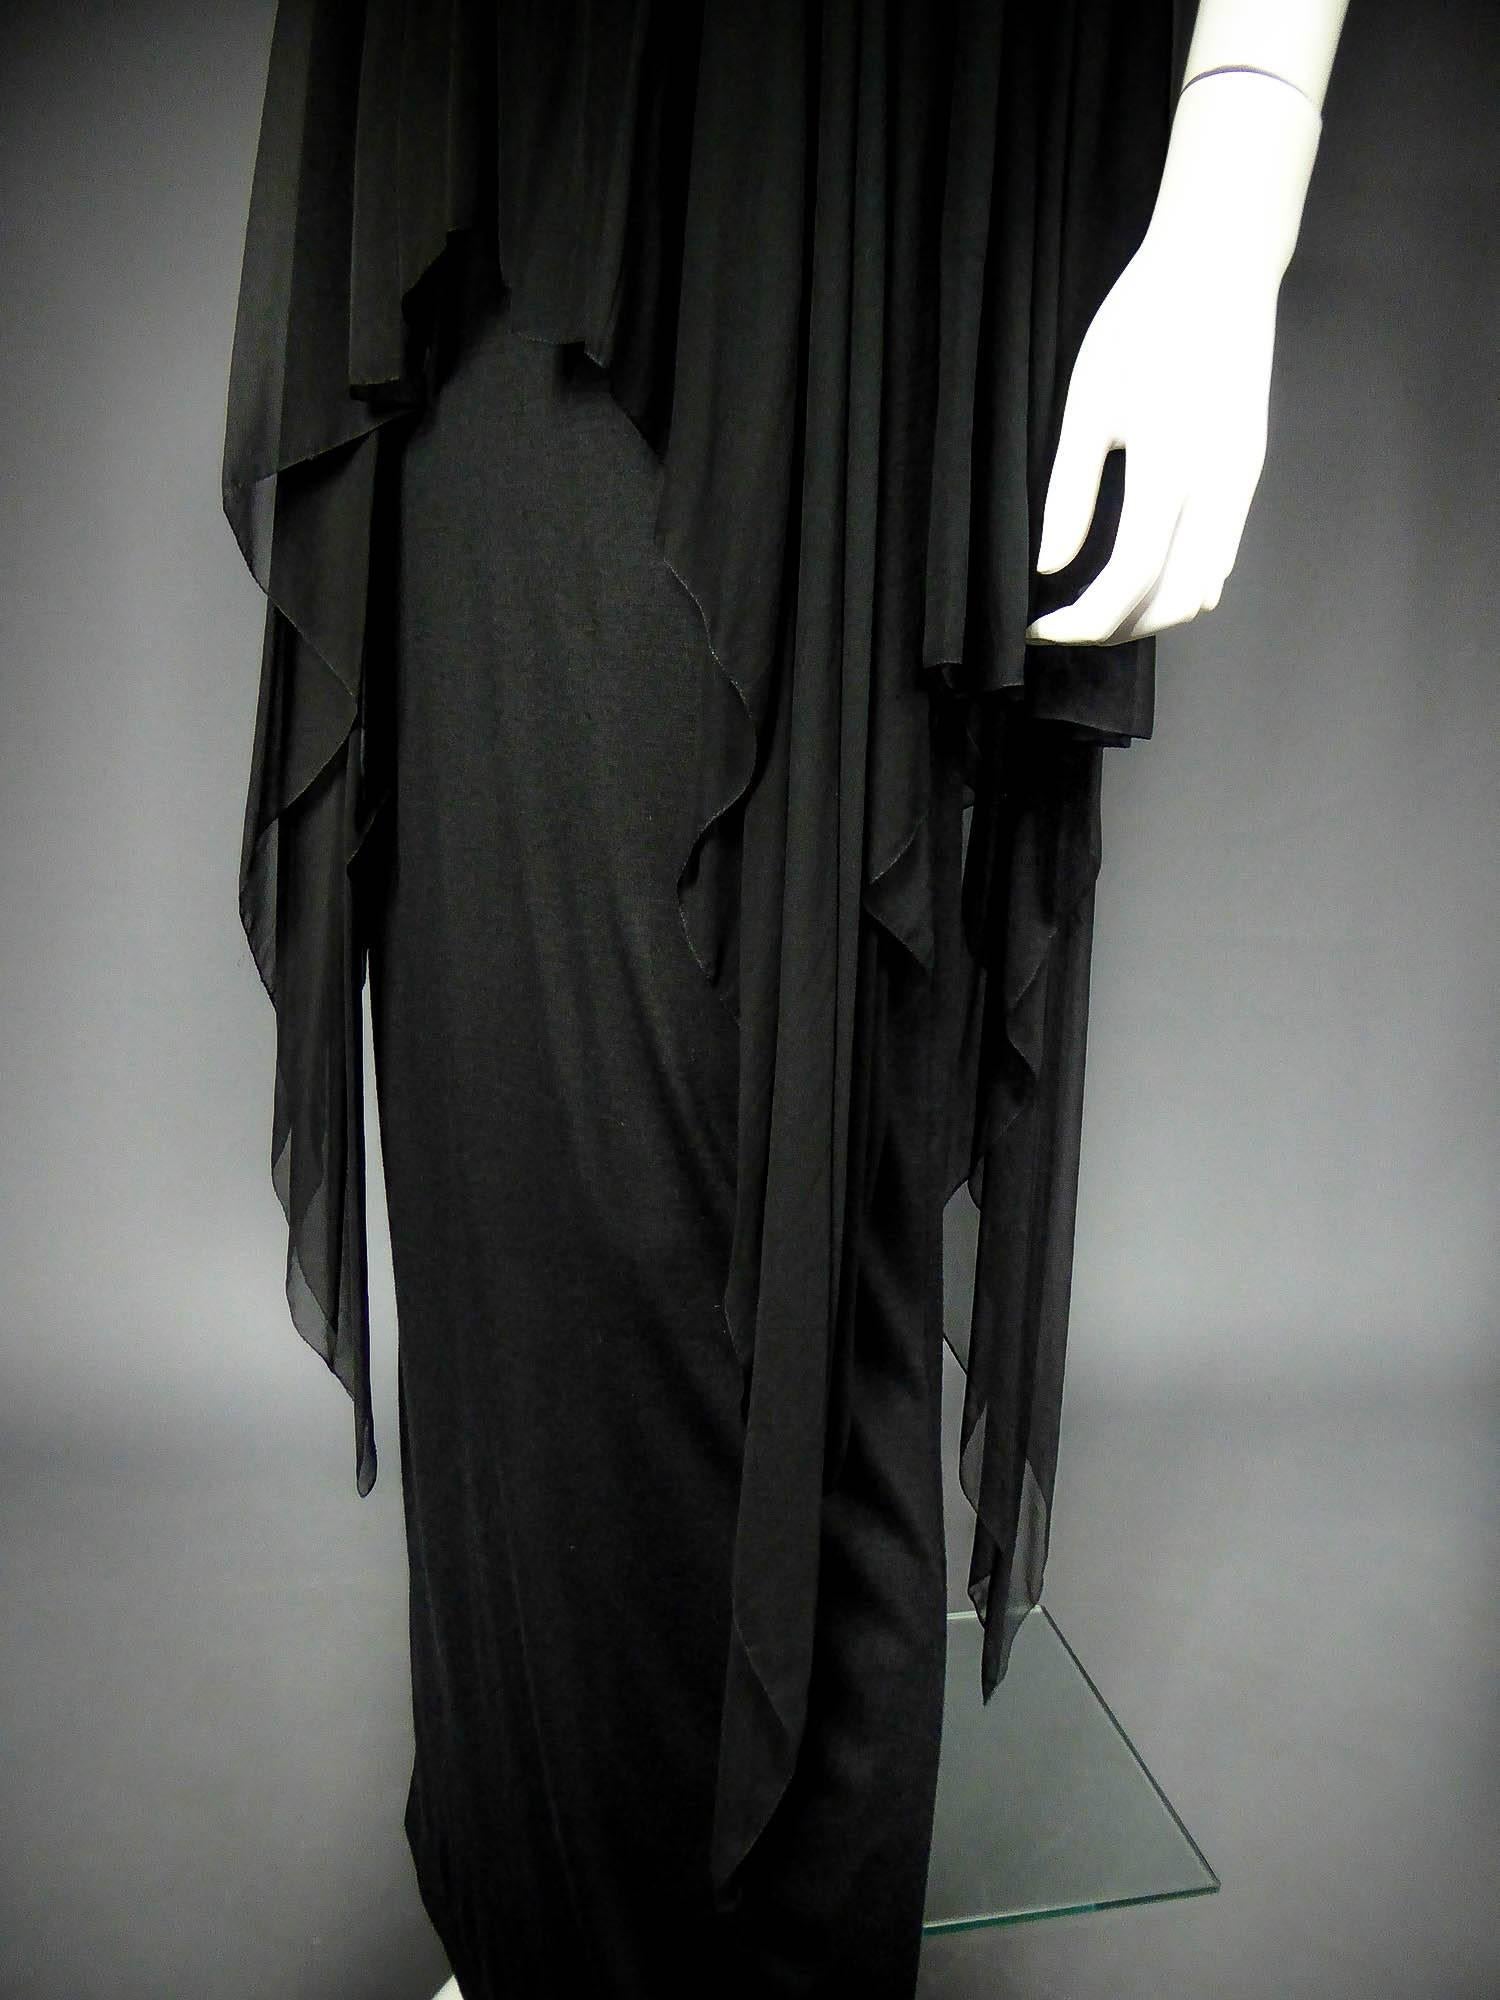 A Christian Dior Haute Couture Evening Dress by Marc Bohan Circa 1975 For Sale 2